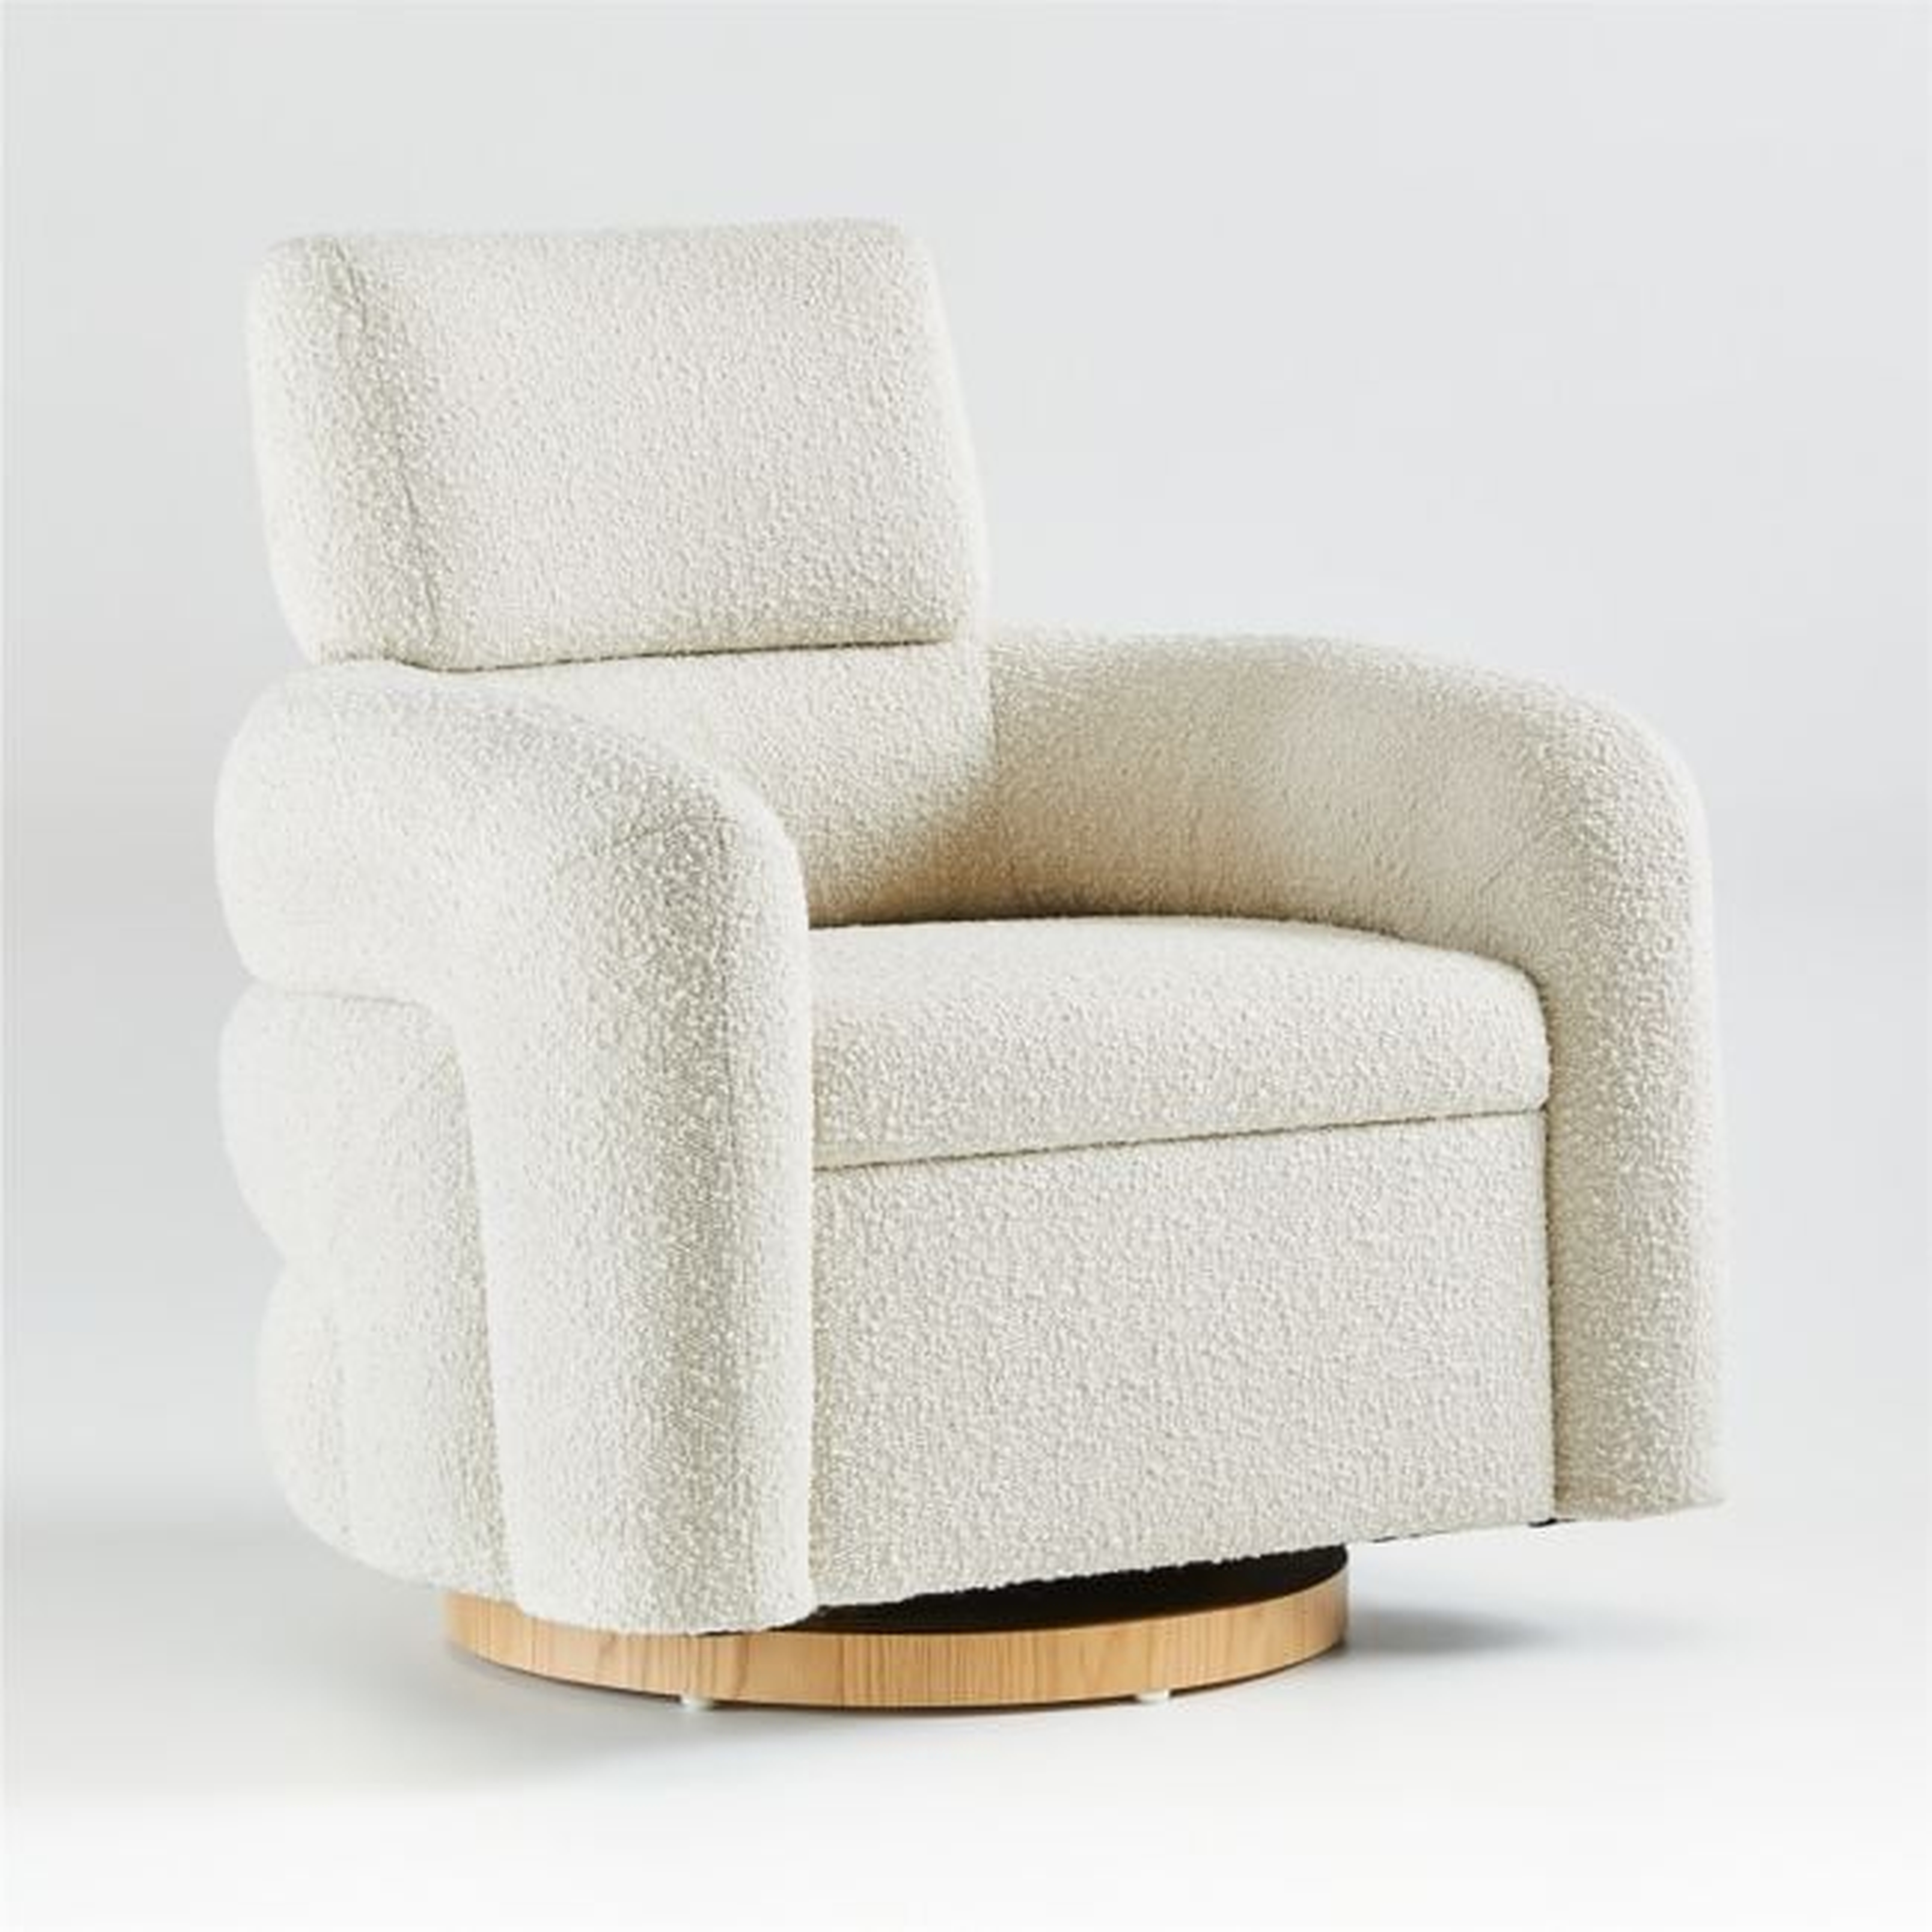 Snoozer Cream Boucle Nursery Swivel Glider Chair by Leanne Ford - Crate and Barrel